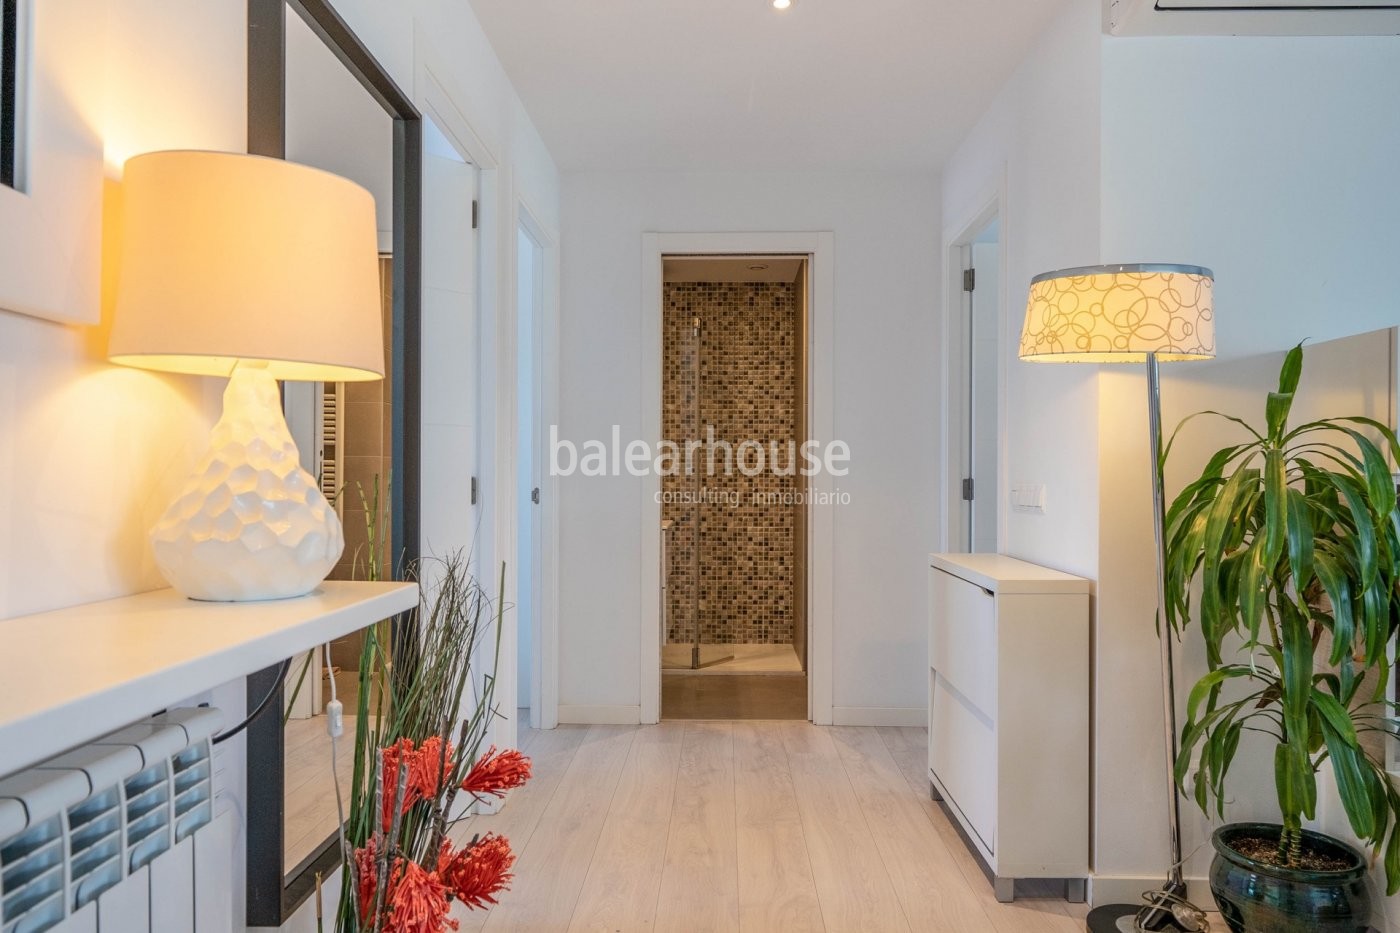 Helles Penthouse mit großer privater Sonnenterrasse in unverbaubarer Lage in Palma